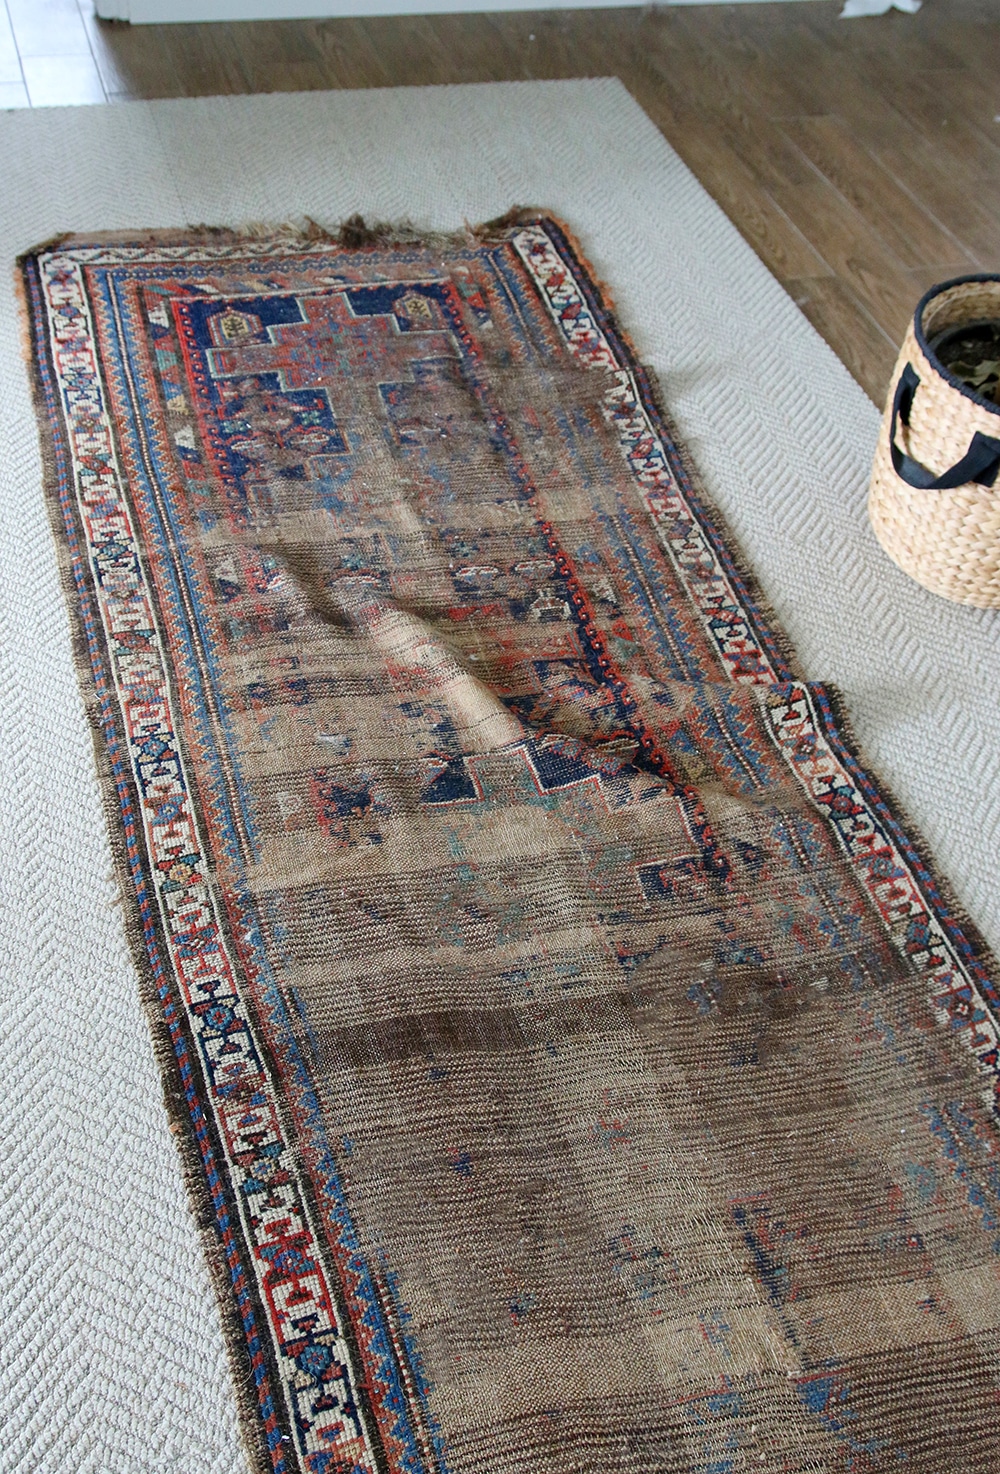 5 Tips for Keeping Area Rugs EXACTLY